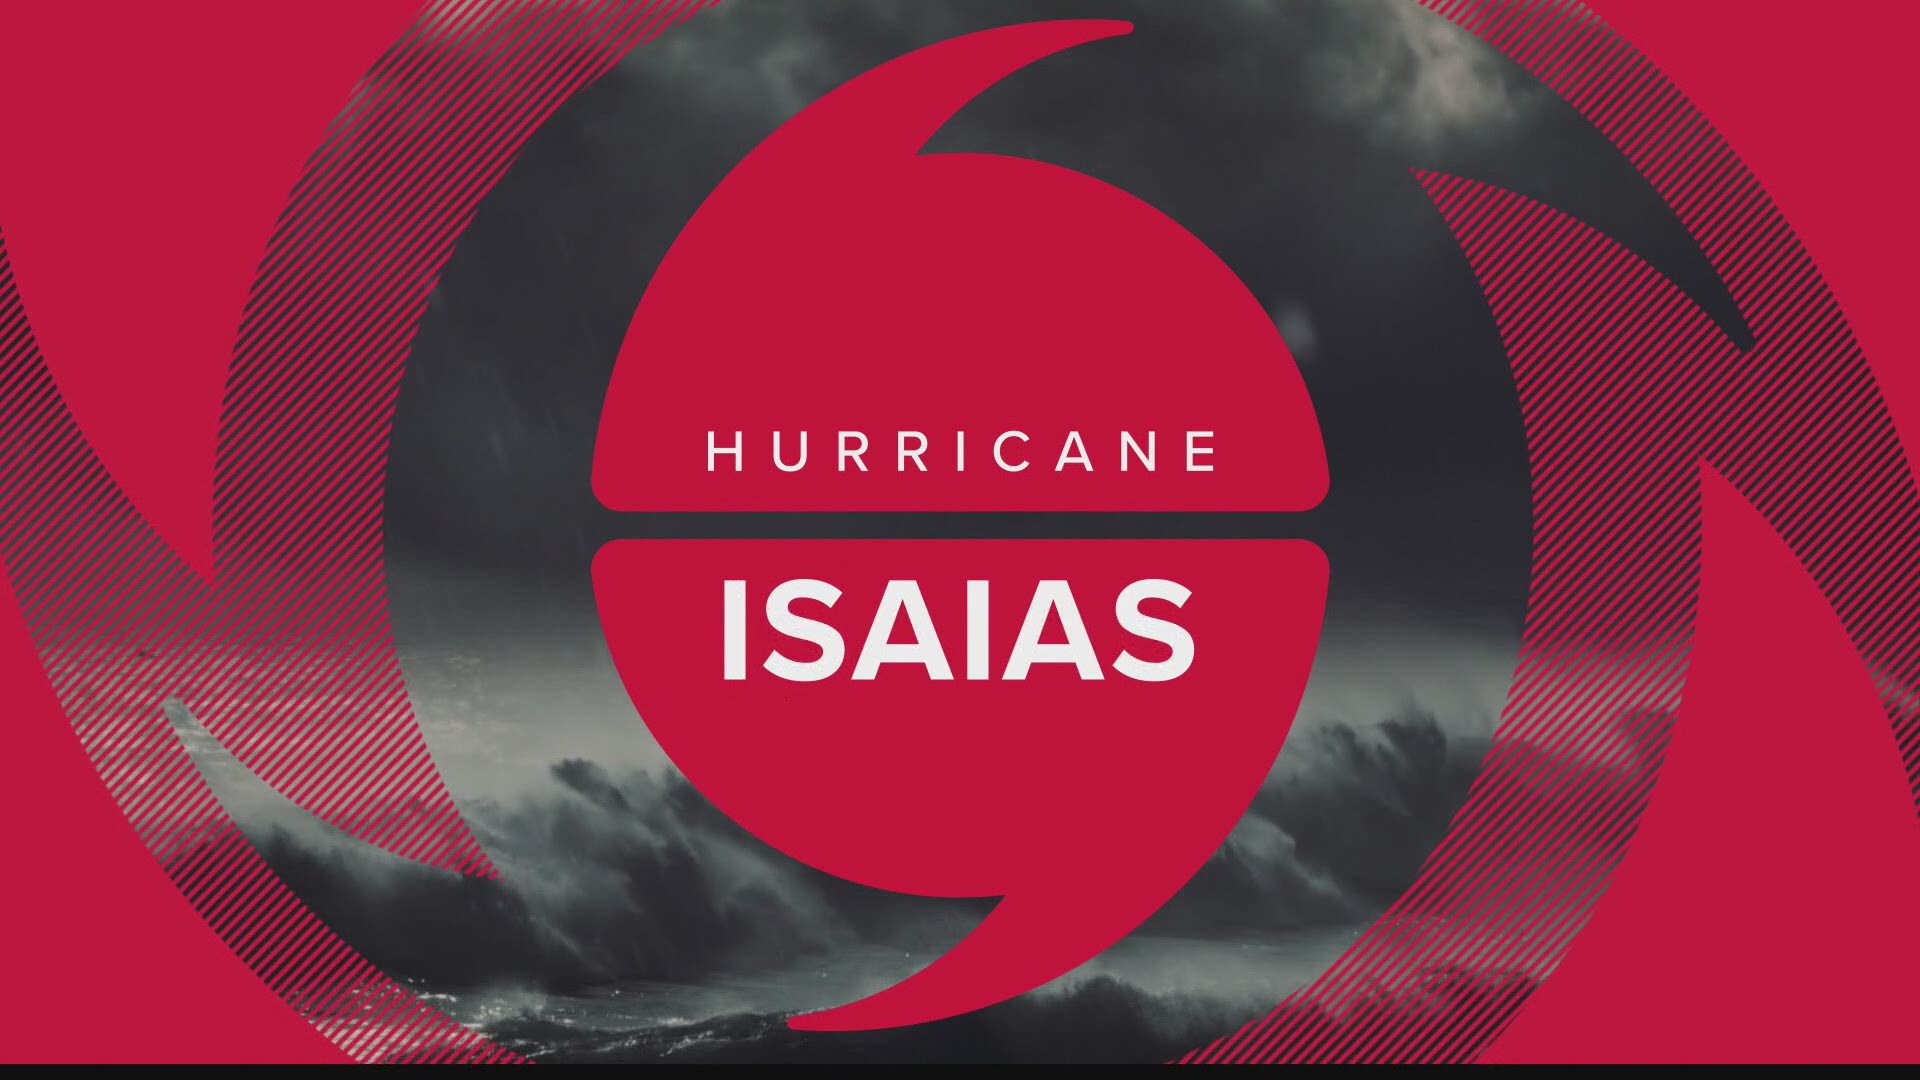 Hurricane Isaias is moving through the Bahamas tonight and is expected to near Florida's east coast late Saturday.